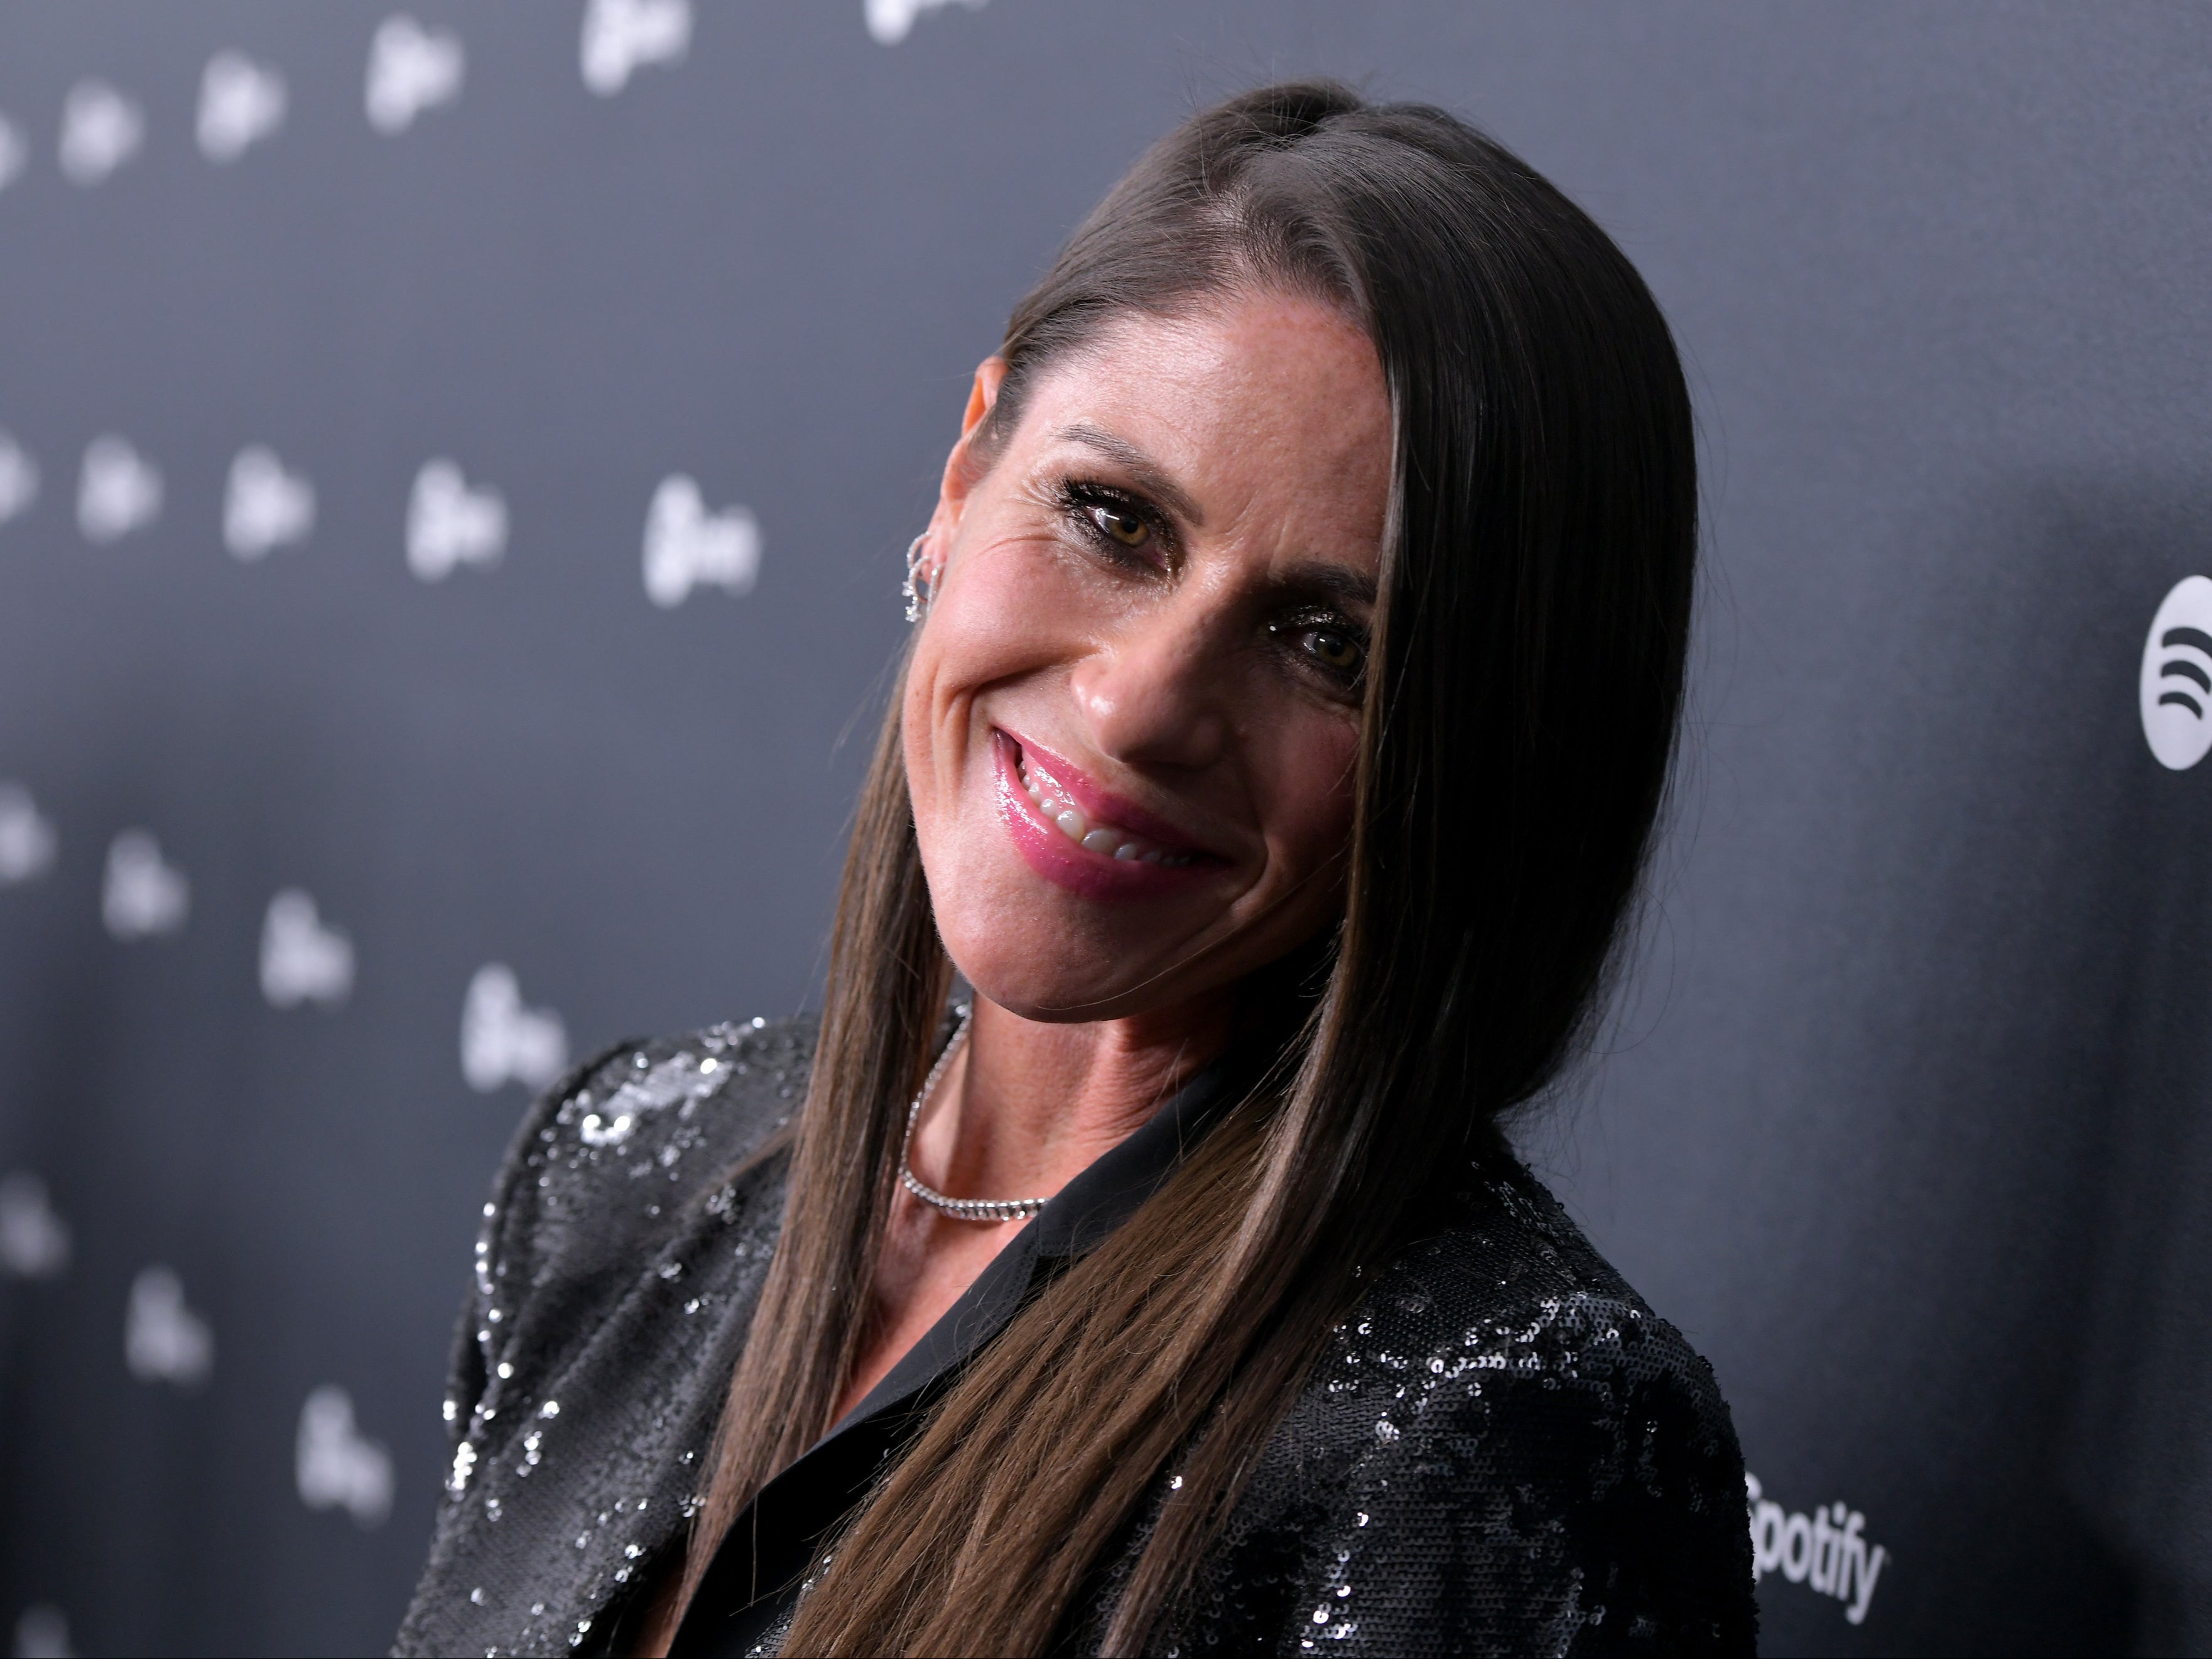 <p>Soleil Moon Frye at a Spotify event on 23 January 2020 in Los Angeles, California</p>